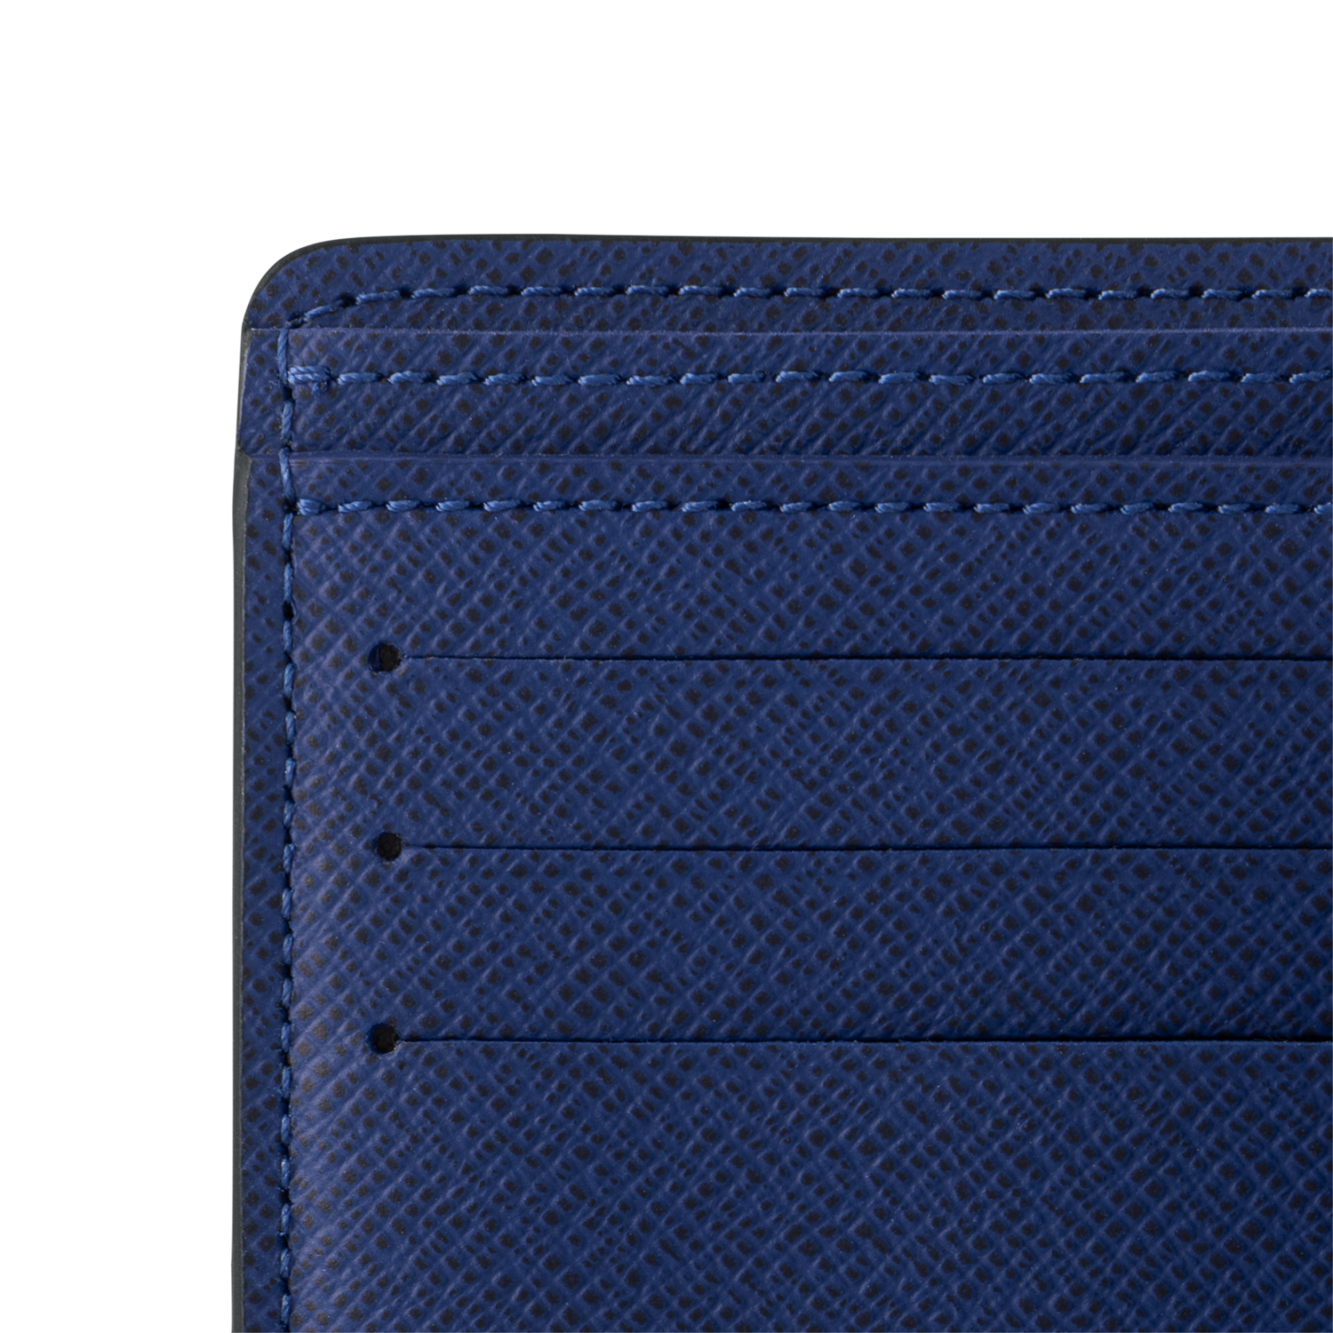 Louis Vuitton Multiple Wallet Denim in Coated Canvas/Cowhide Leather - US